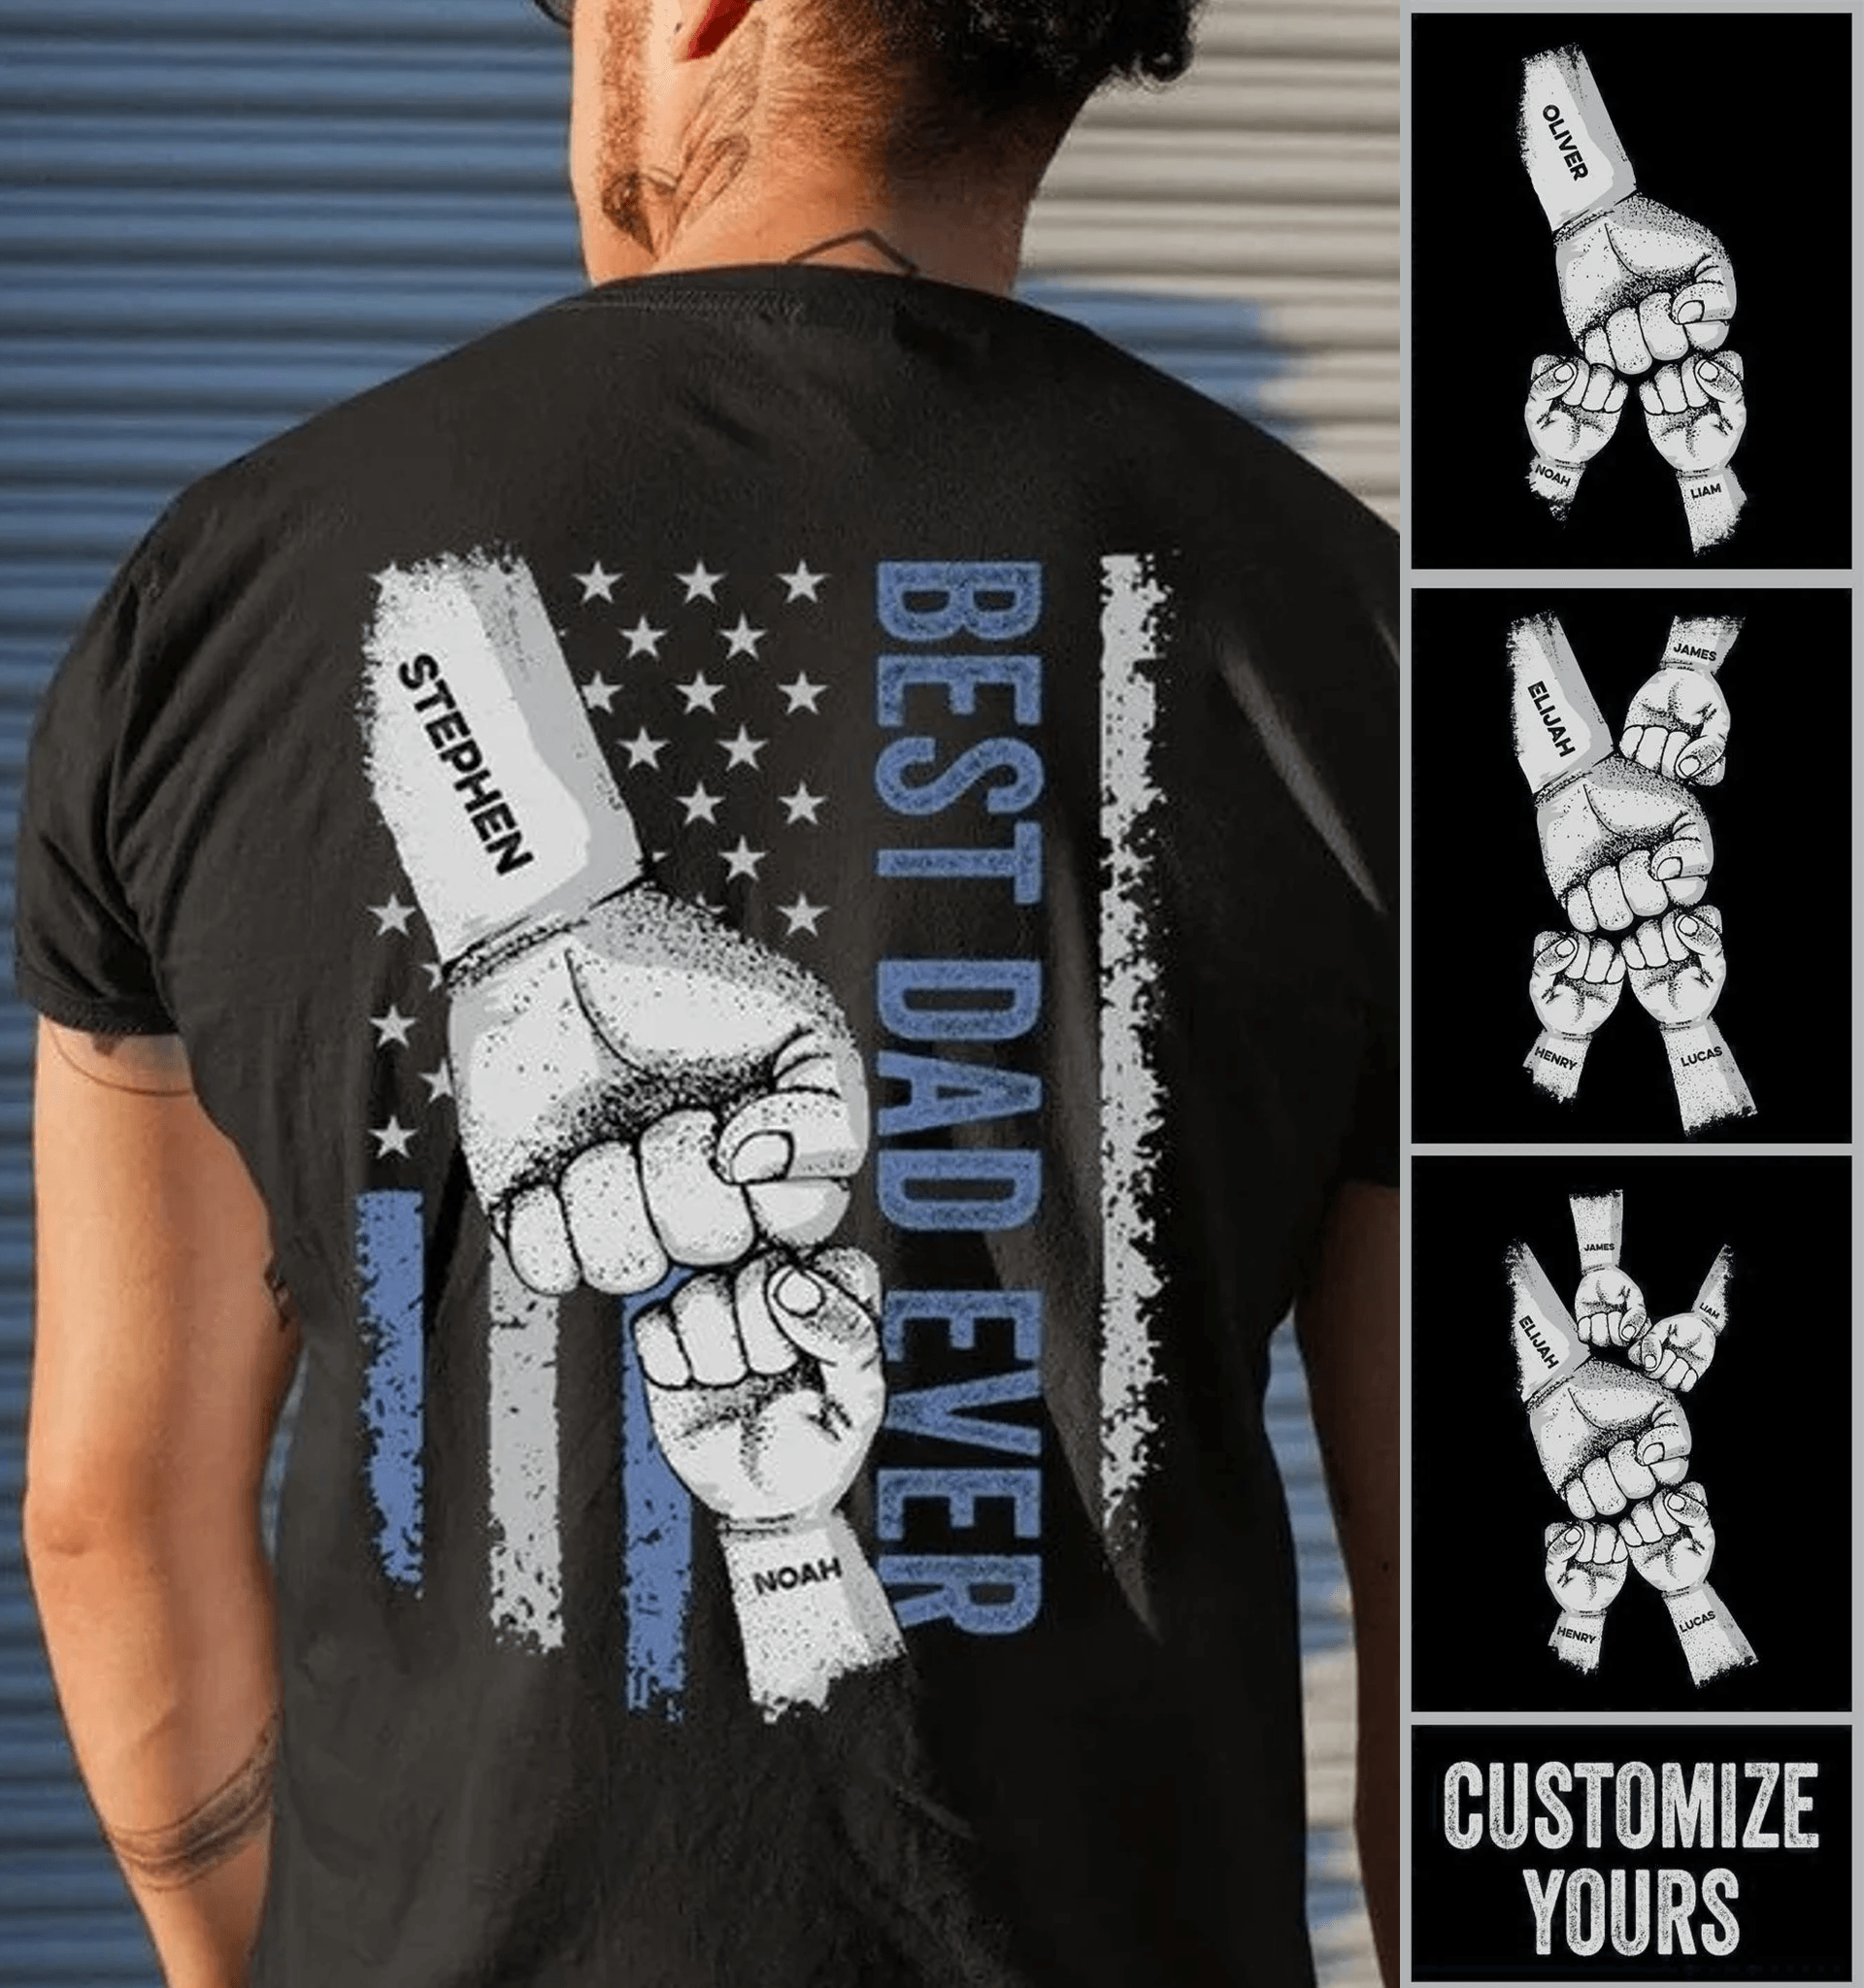 Best Dad Ever Raised Fist Bump - Personalized Custom Back Printed T Shirt - Father's Day Gift for Dad, Grandpa, Daddy, Dada, Dad Jokes